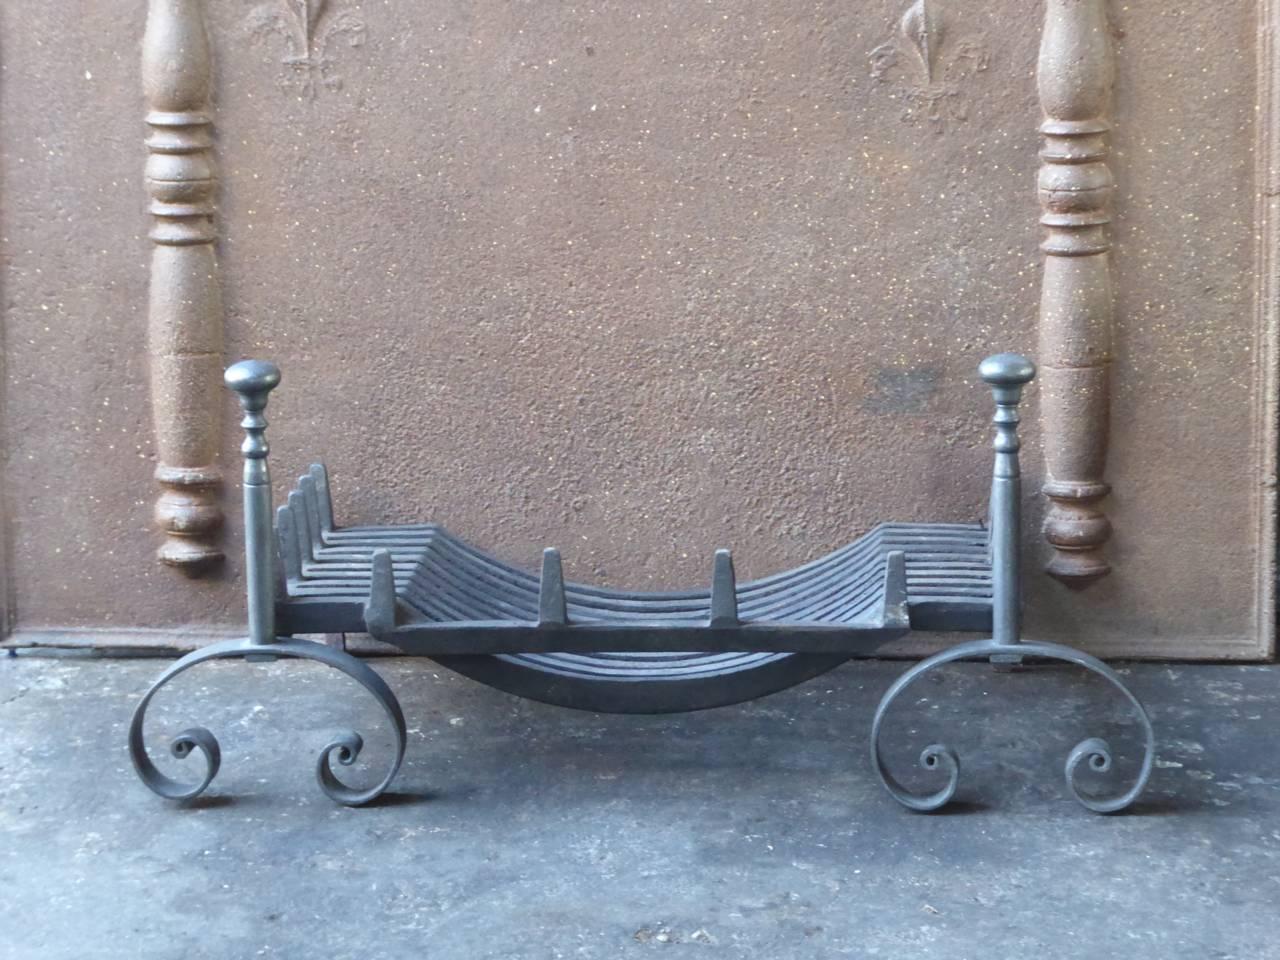 19th century English Victorian fireplace grate made of cast iron and wrought iron. The total width of the front of the grate is 81 cm.

We have a unique and specialized collection of antique and used fireplace accessories consisting of more than